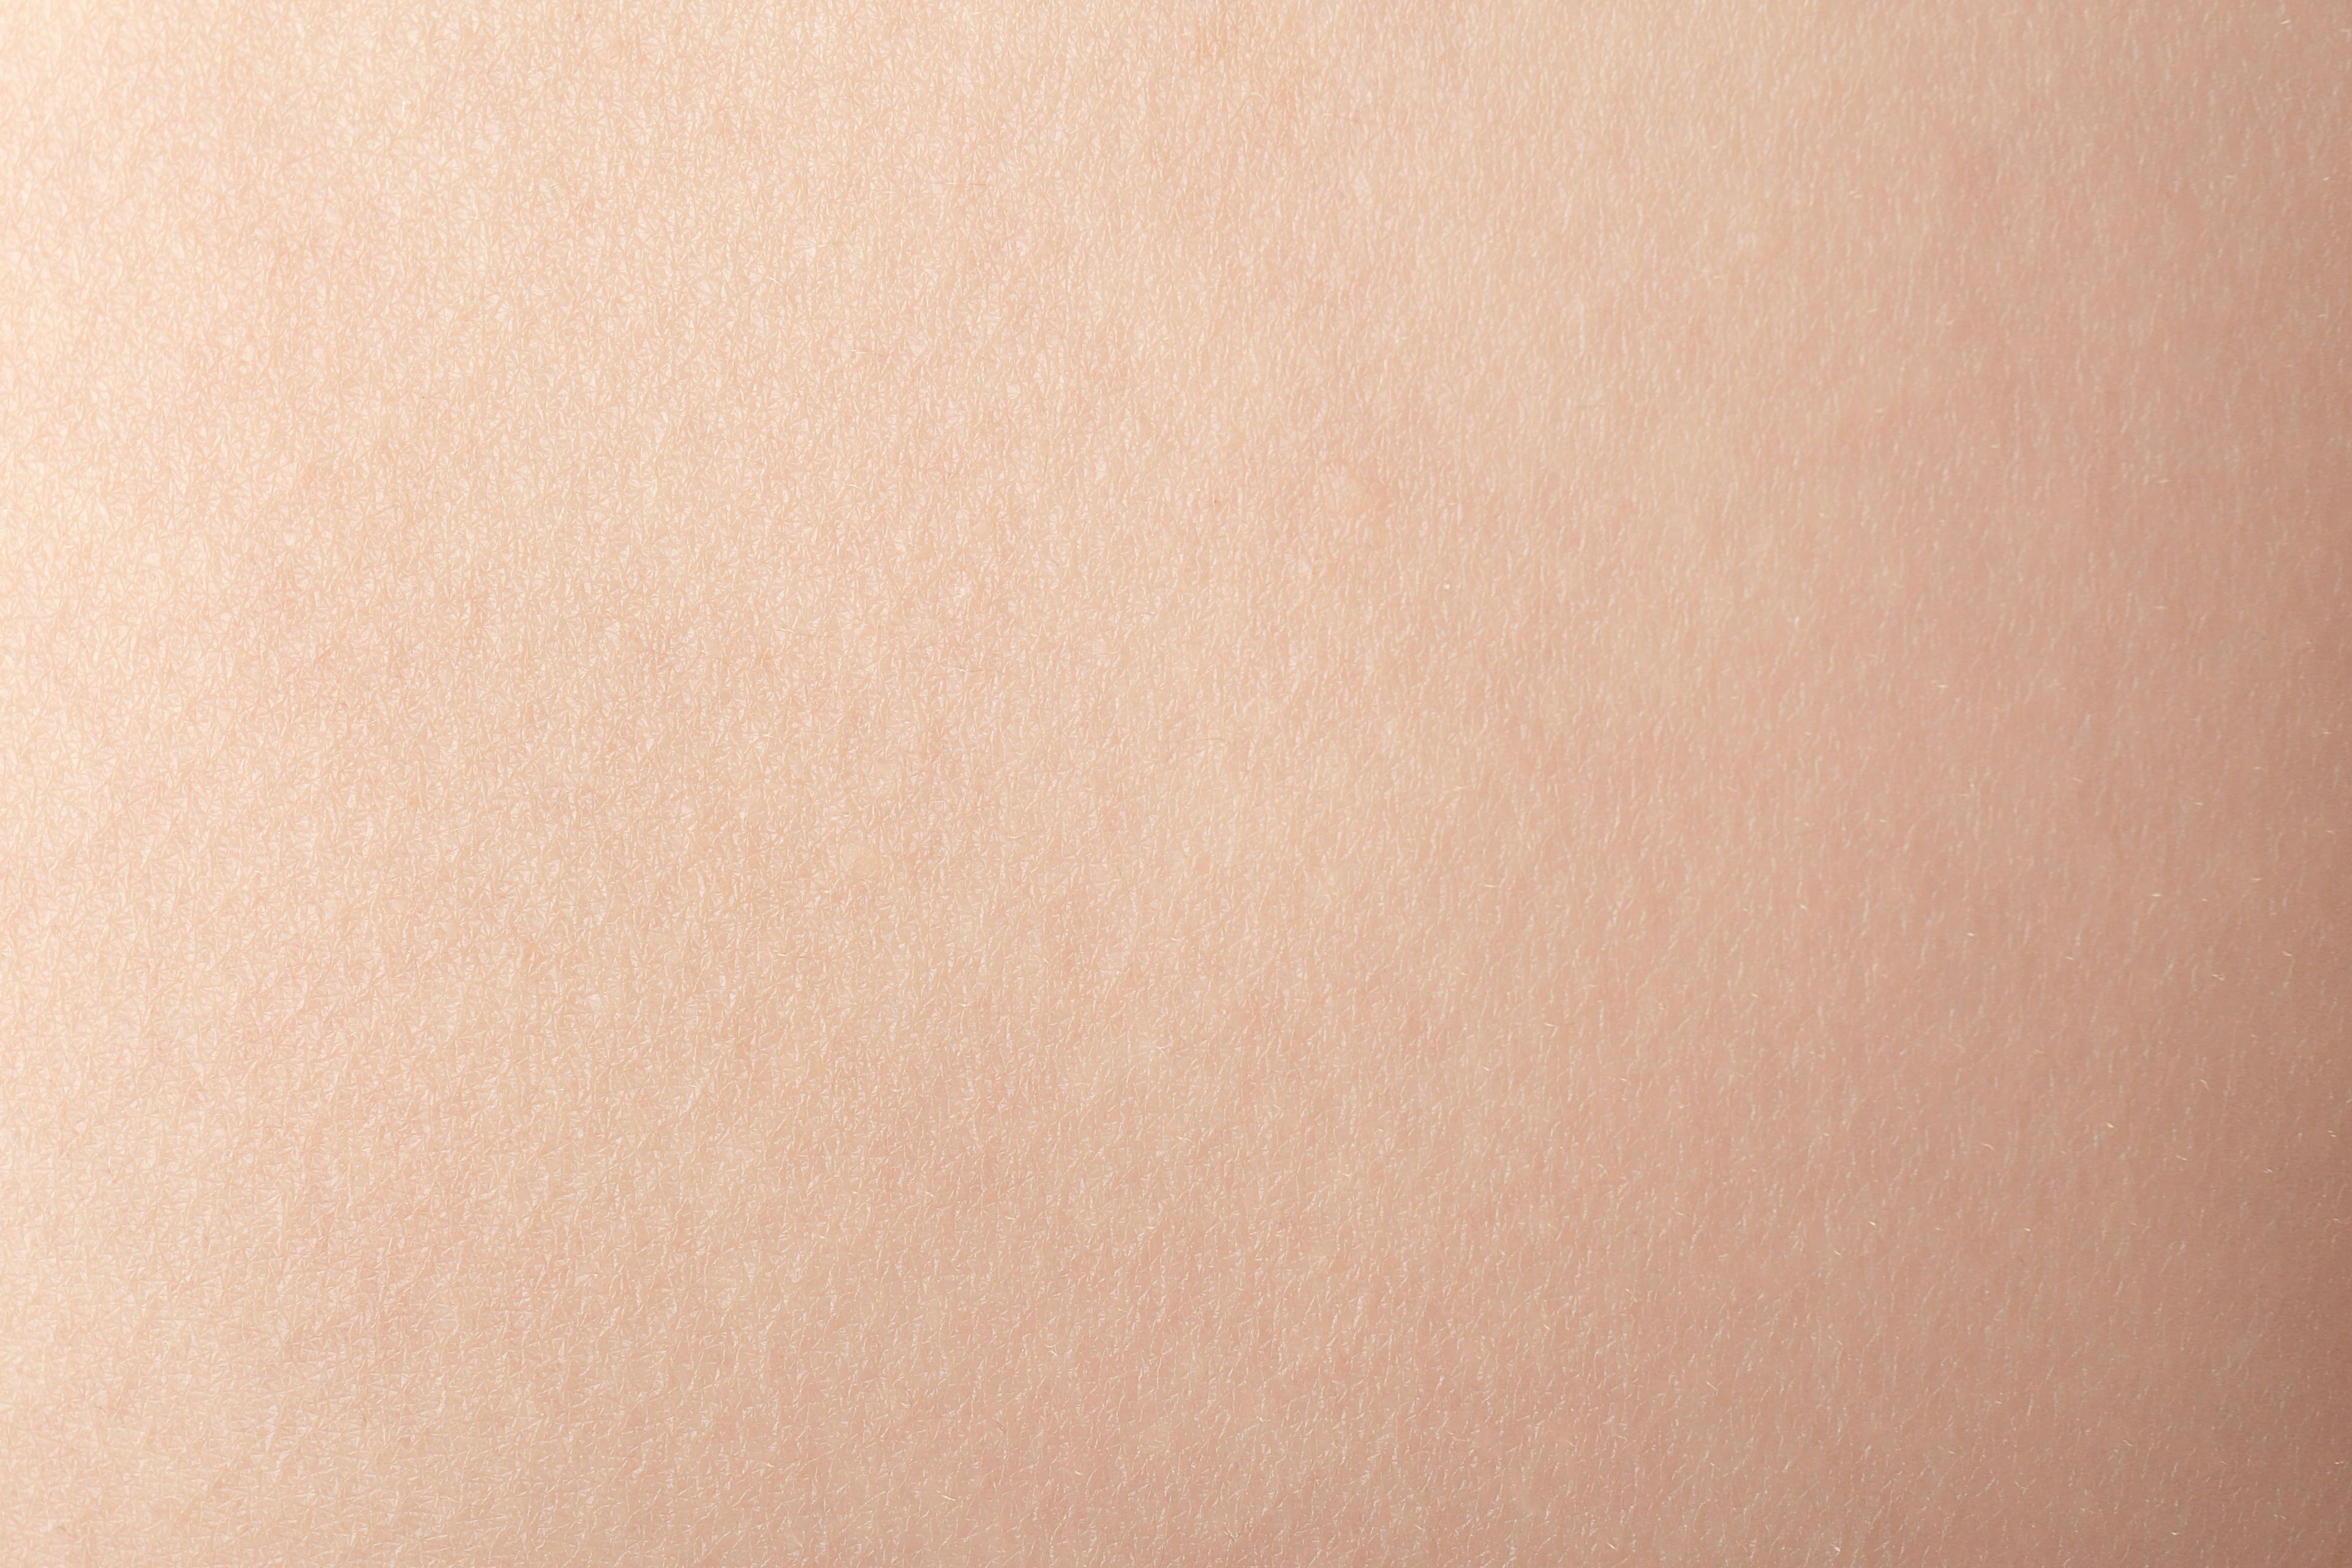 Zoomed in view of skin texture on light skin